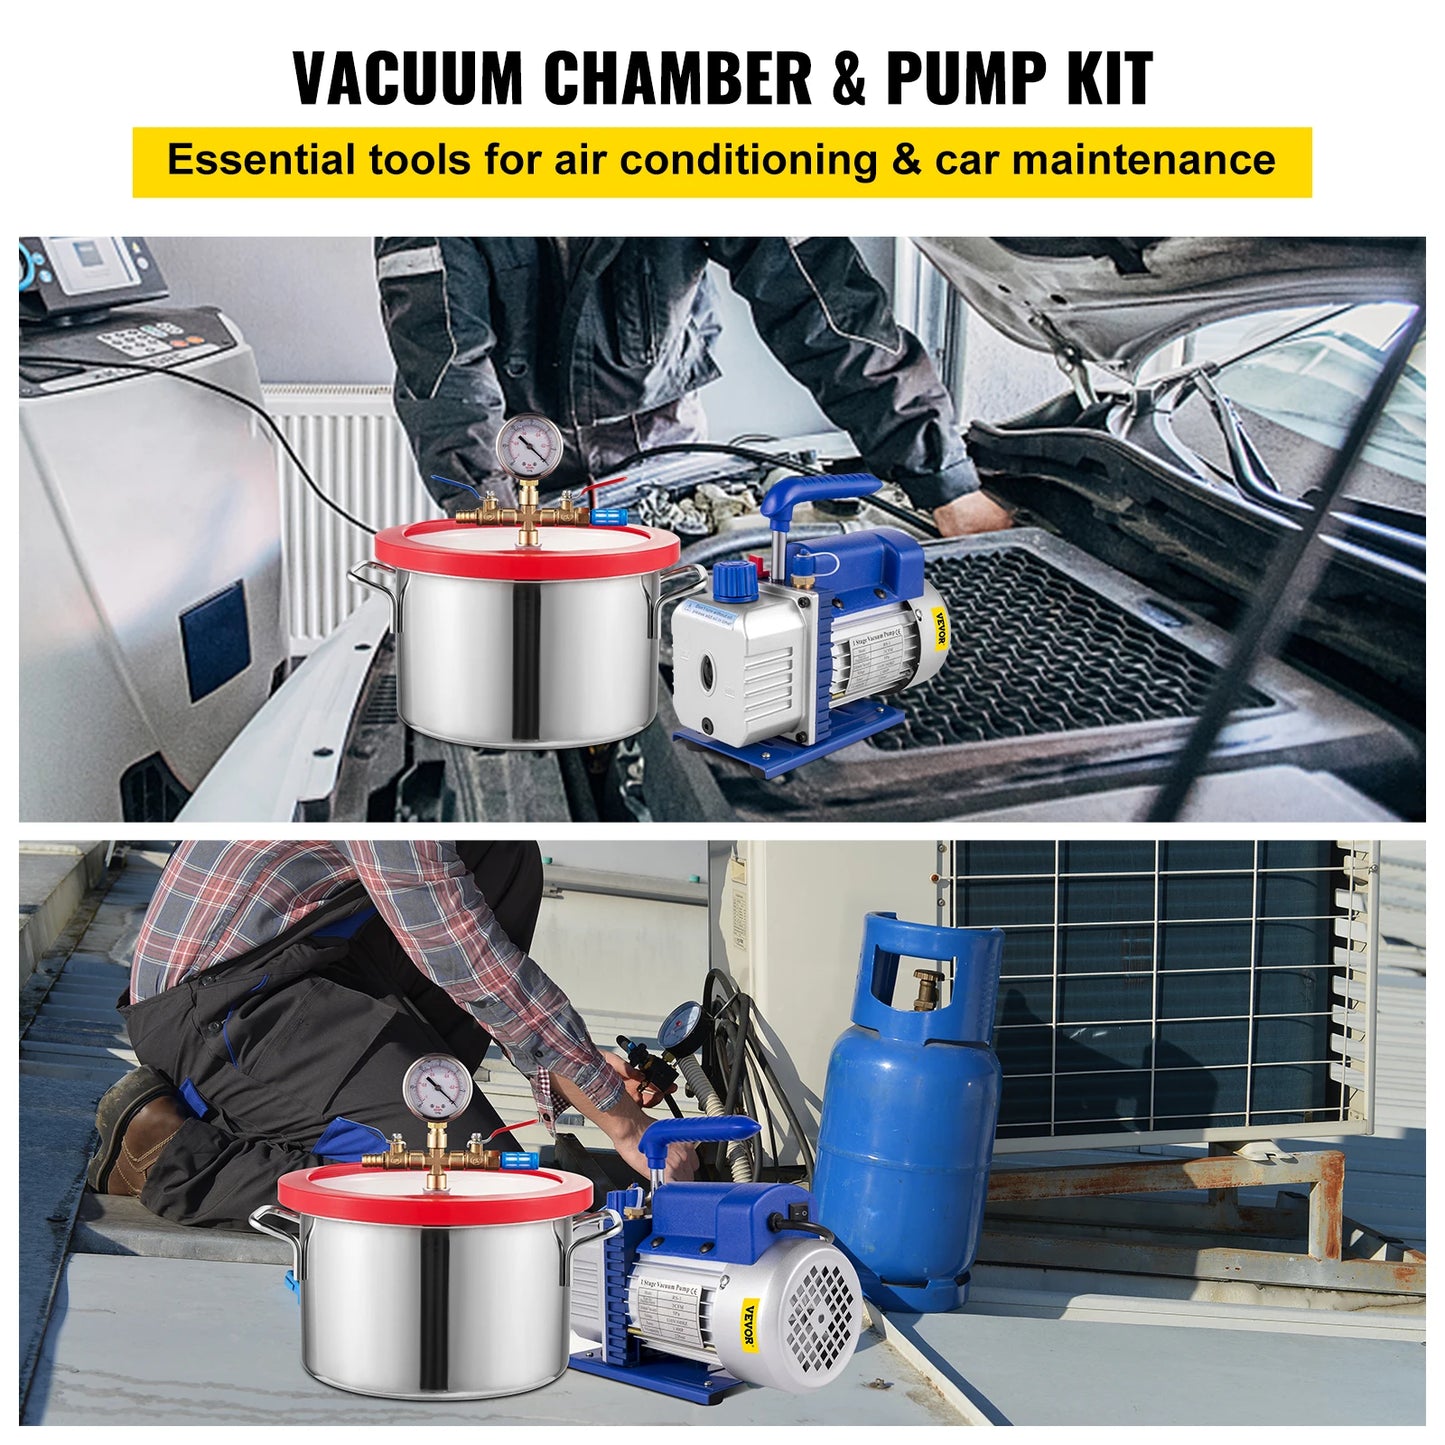 VEVOR 1 Gallon Vacuum Degassing Chamber 3.8L Stainless Steel with 3 CFM Single Stage Vacuum Pump